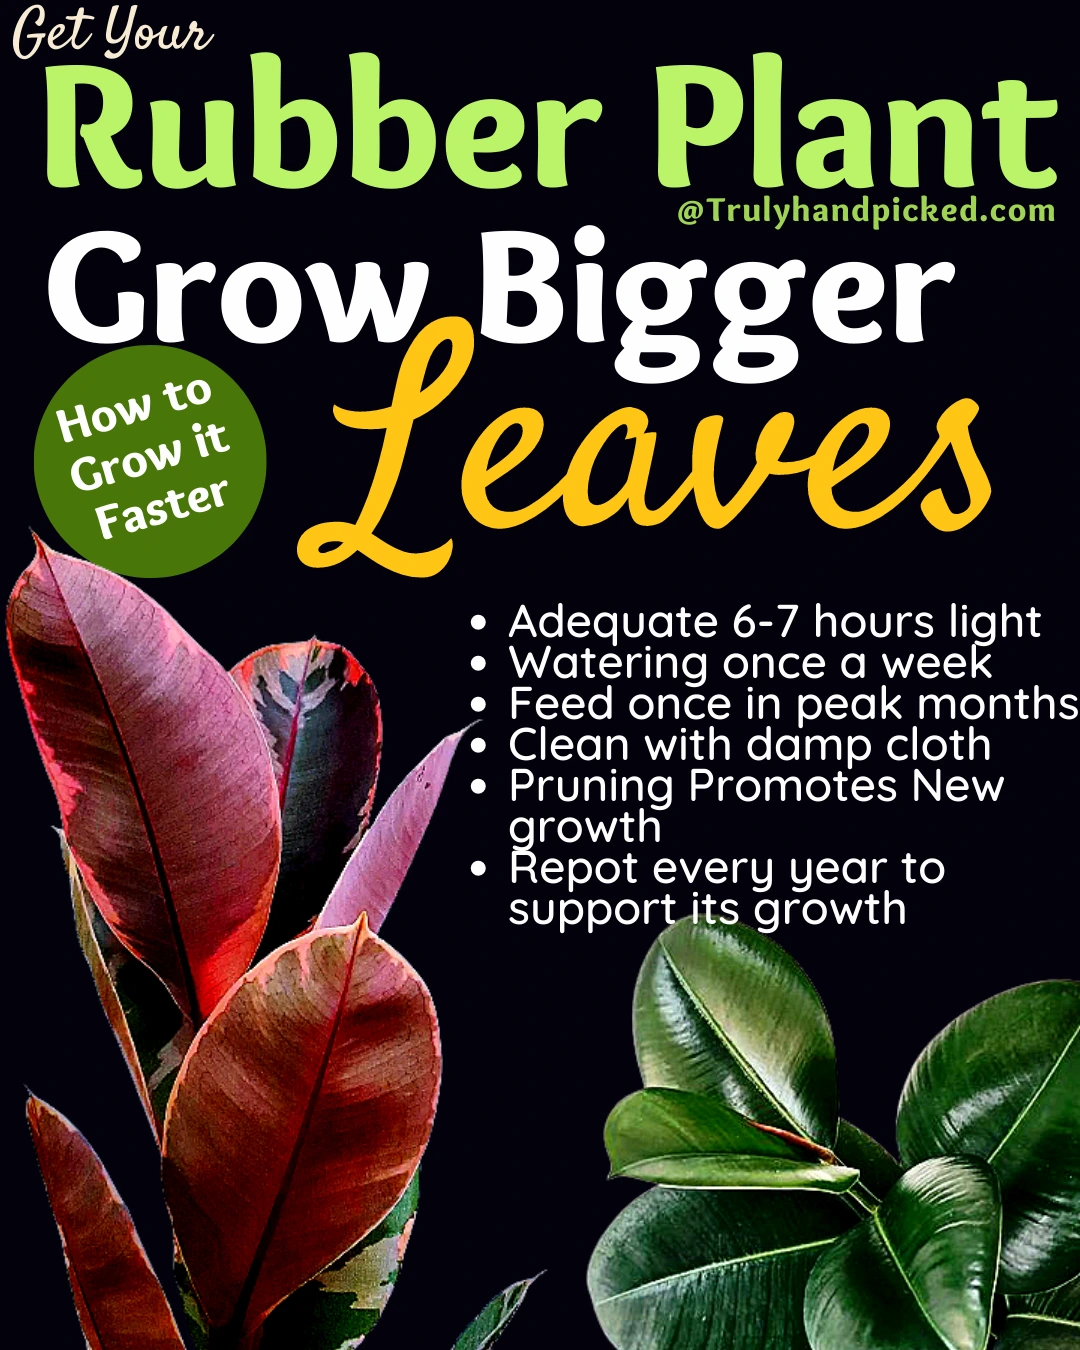 How to make your rubber plant grow bigger leaves faster - Quick Tips